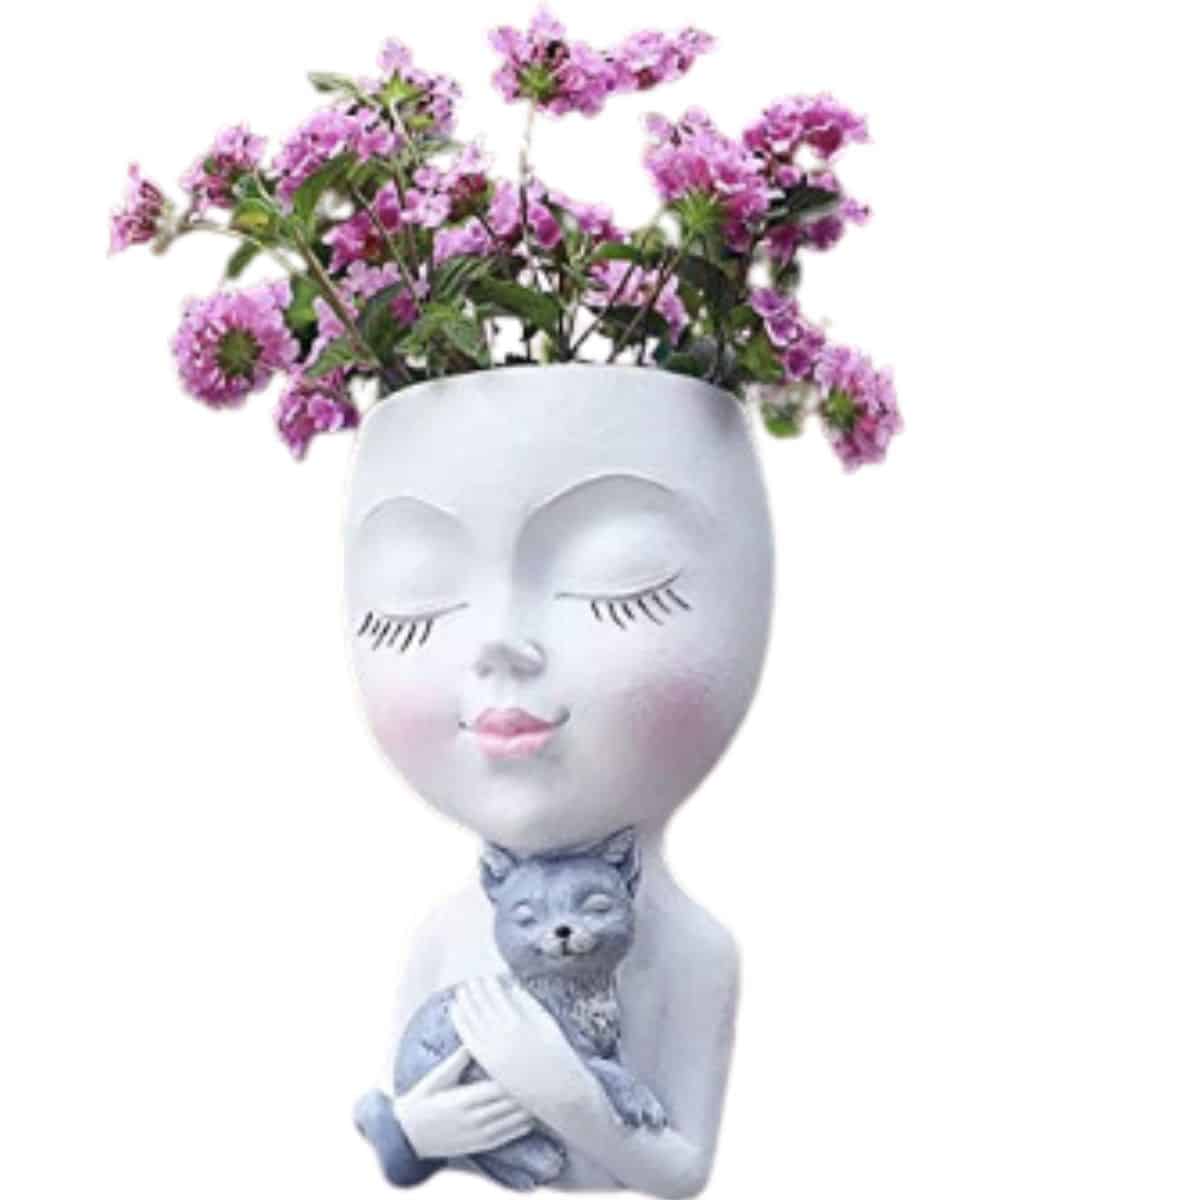 Lady face hugging a cat face planter. 